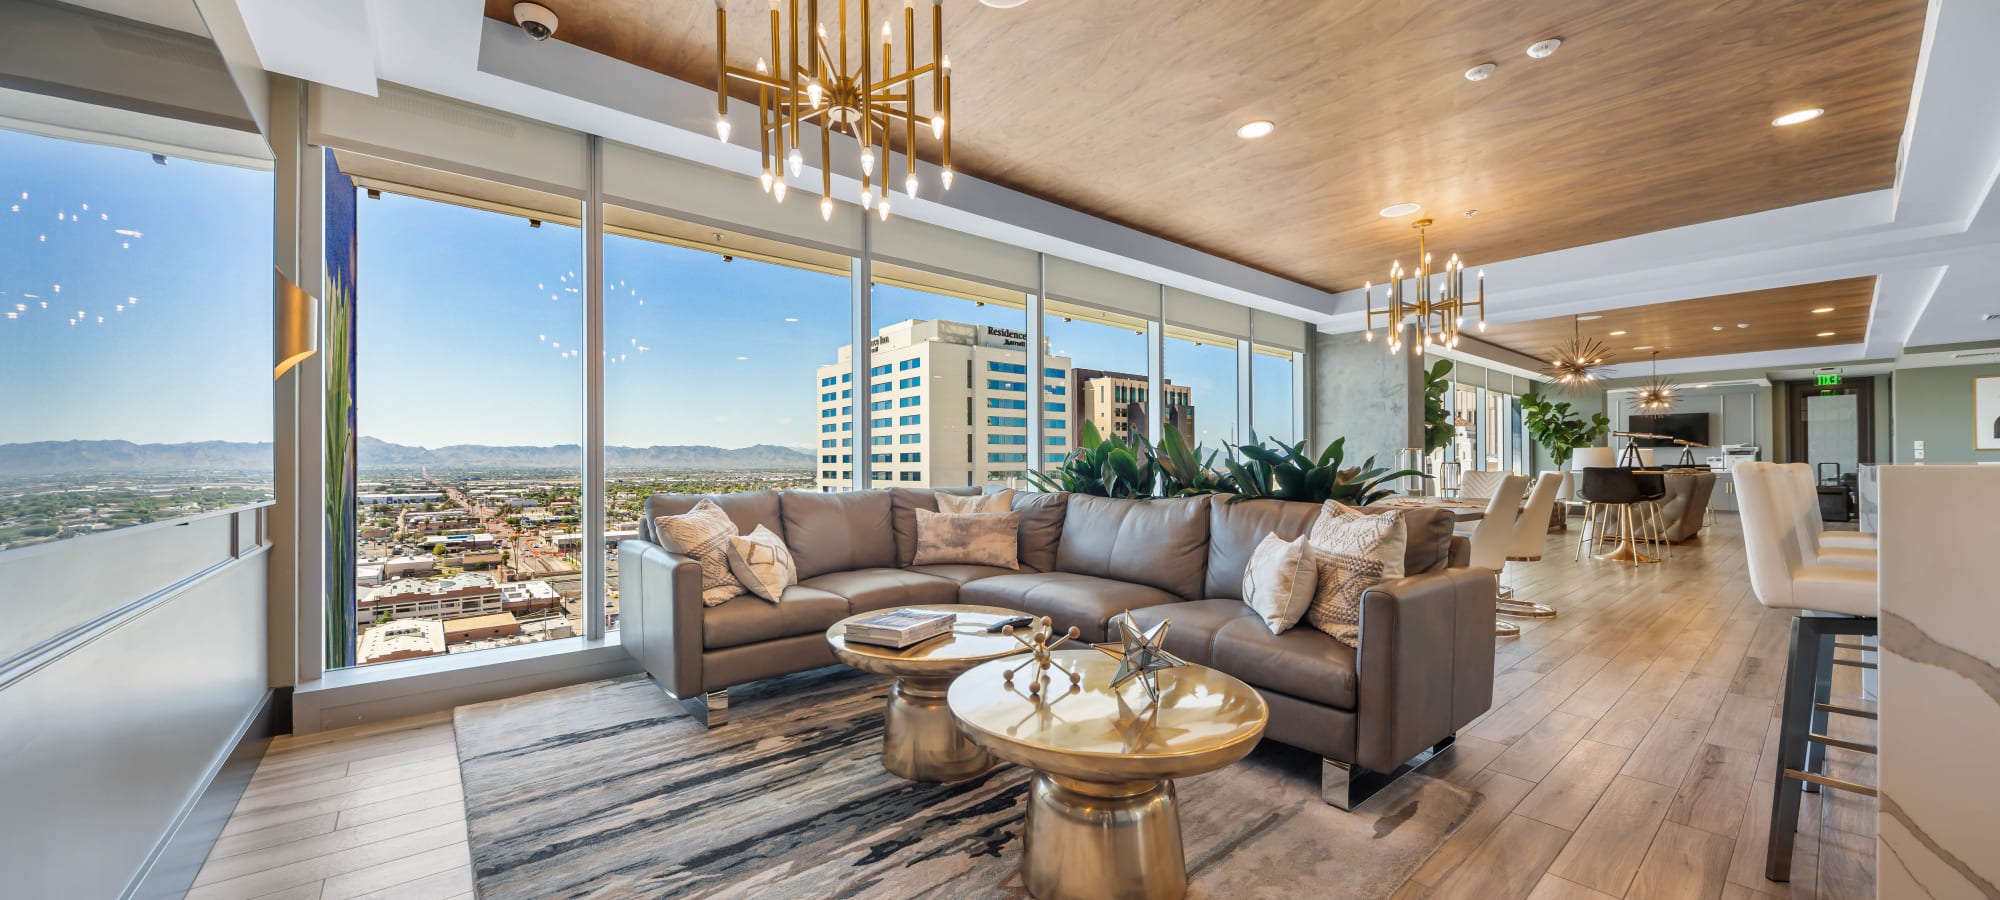 Resident clubhouse lounge at CityScape Residences in Phoenix, Arizona